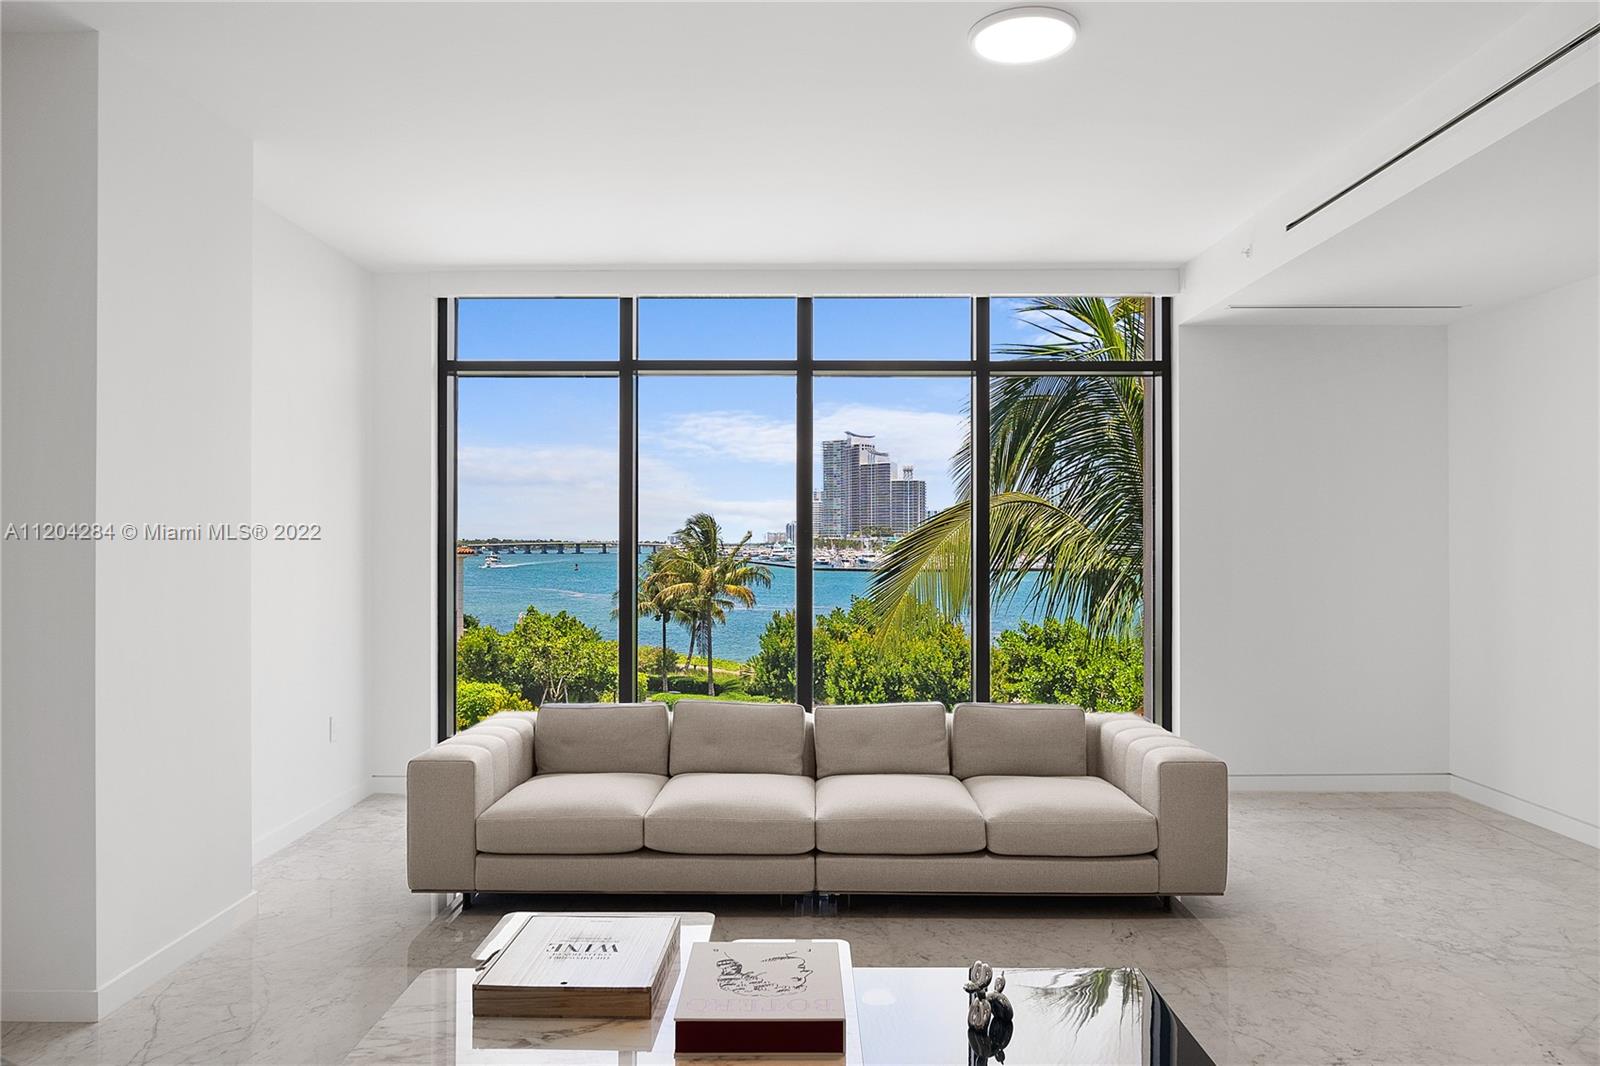 7032  FISHER ISLAND #7032 For Sale A11204284, FL